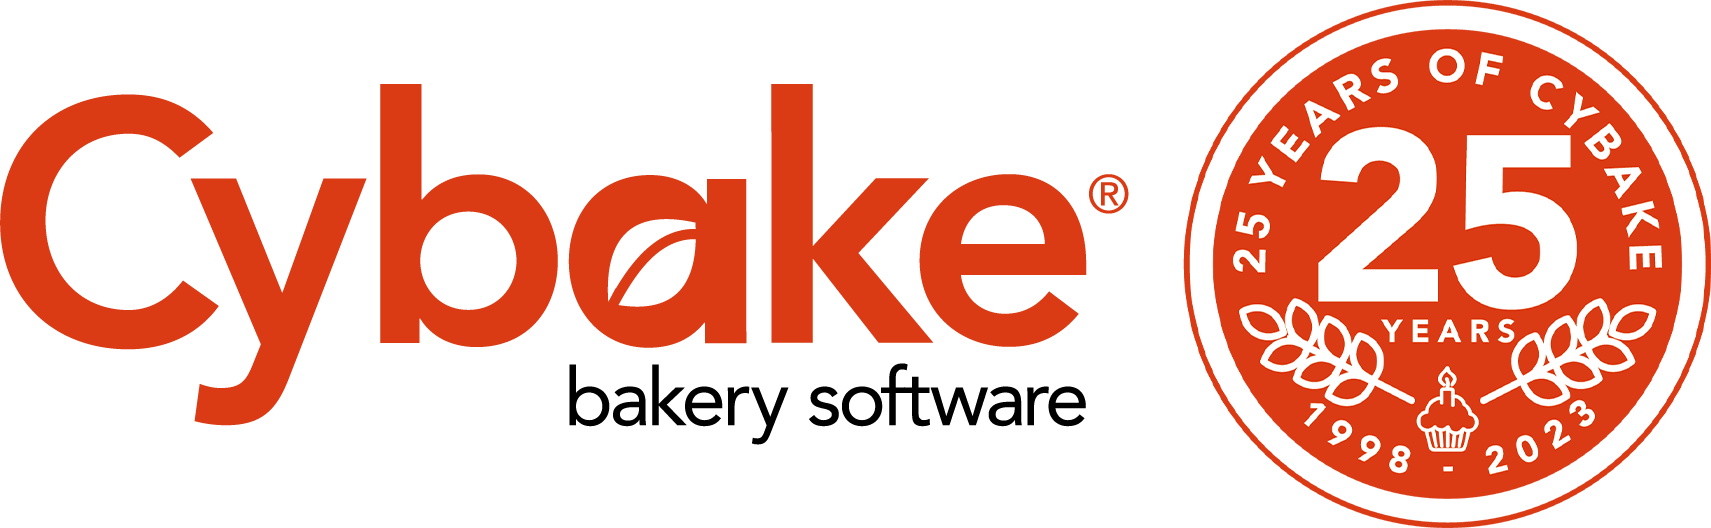 retail bakery software Archives - Cybake